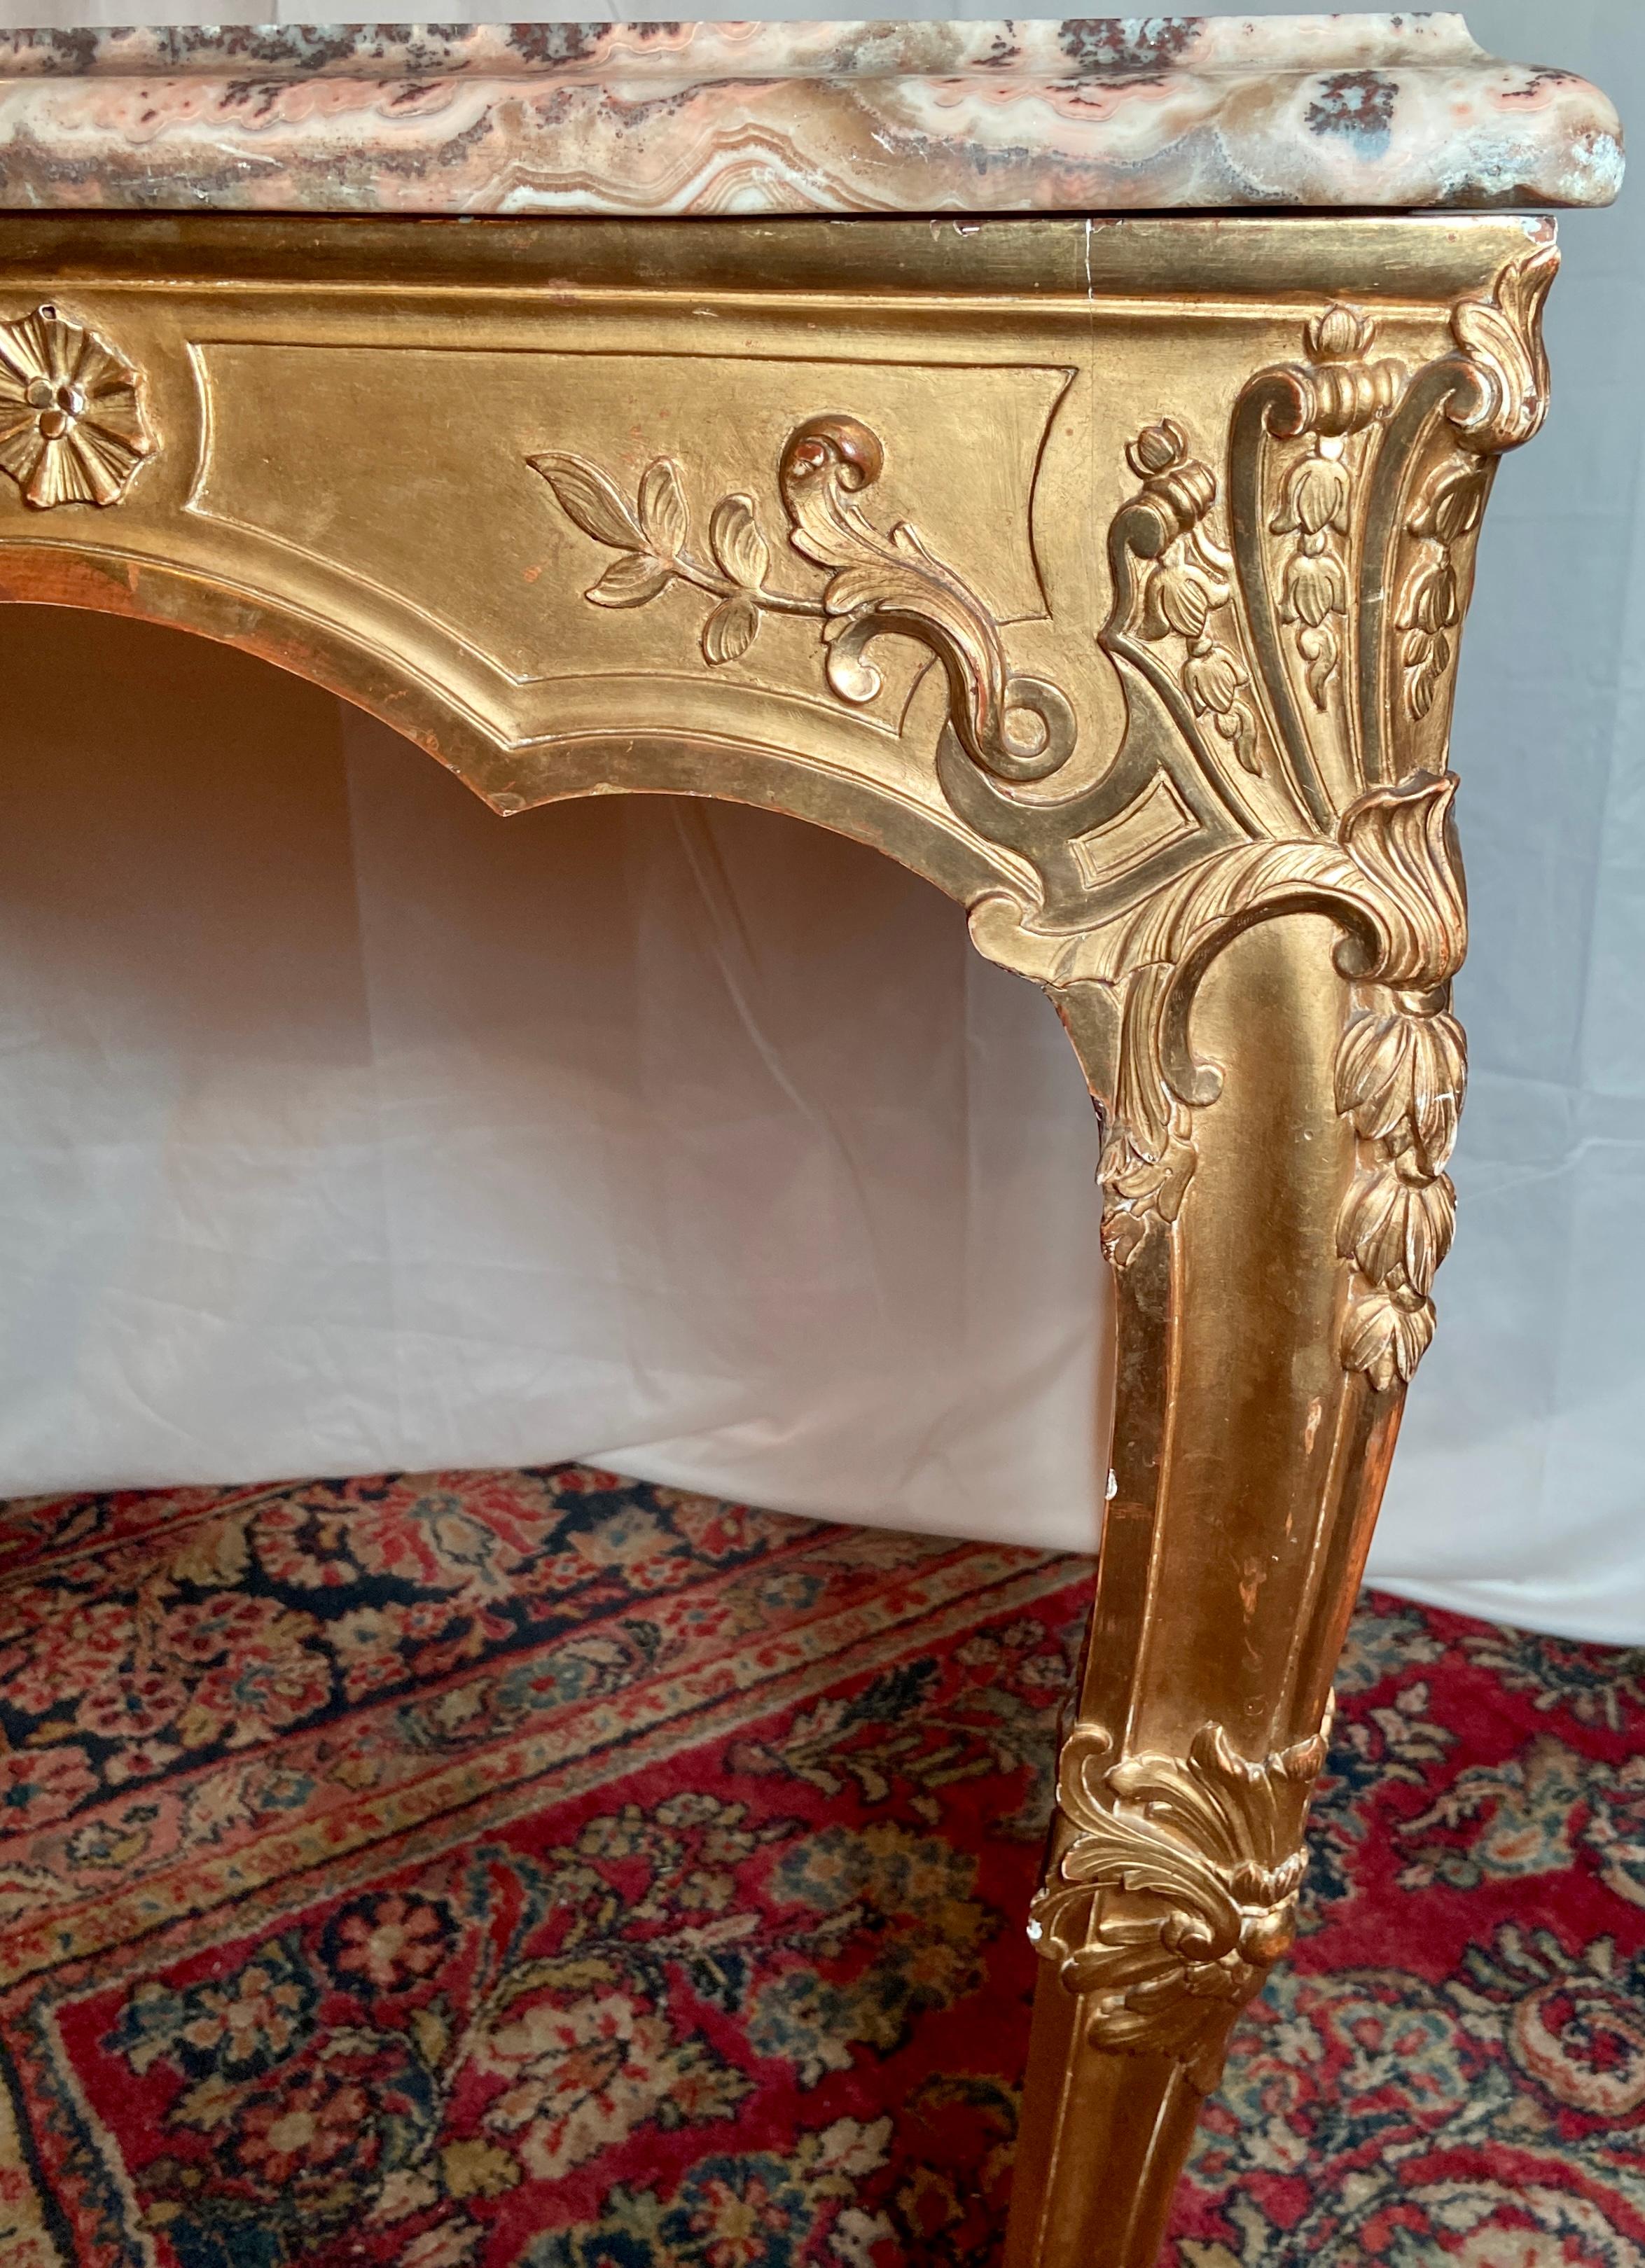 Antique French Régence Gold-Leaf Center Table with Marble Top, Circa 1840-1850 For Sale 1